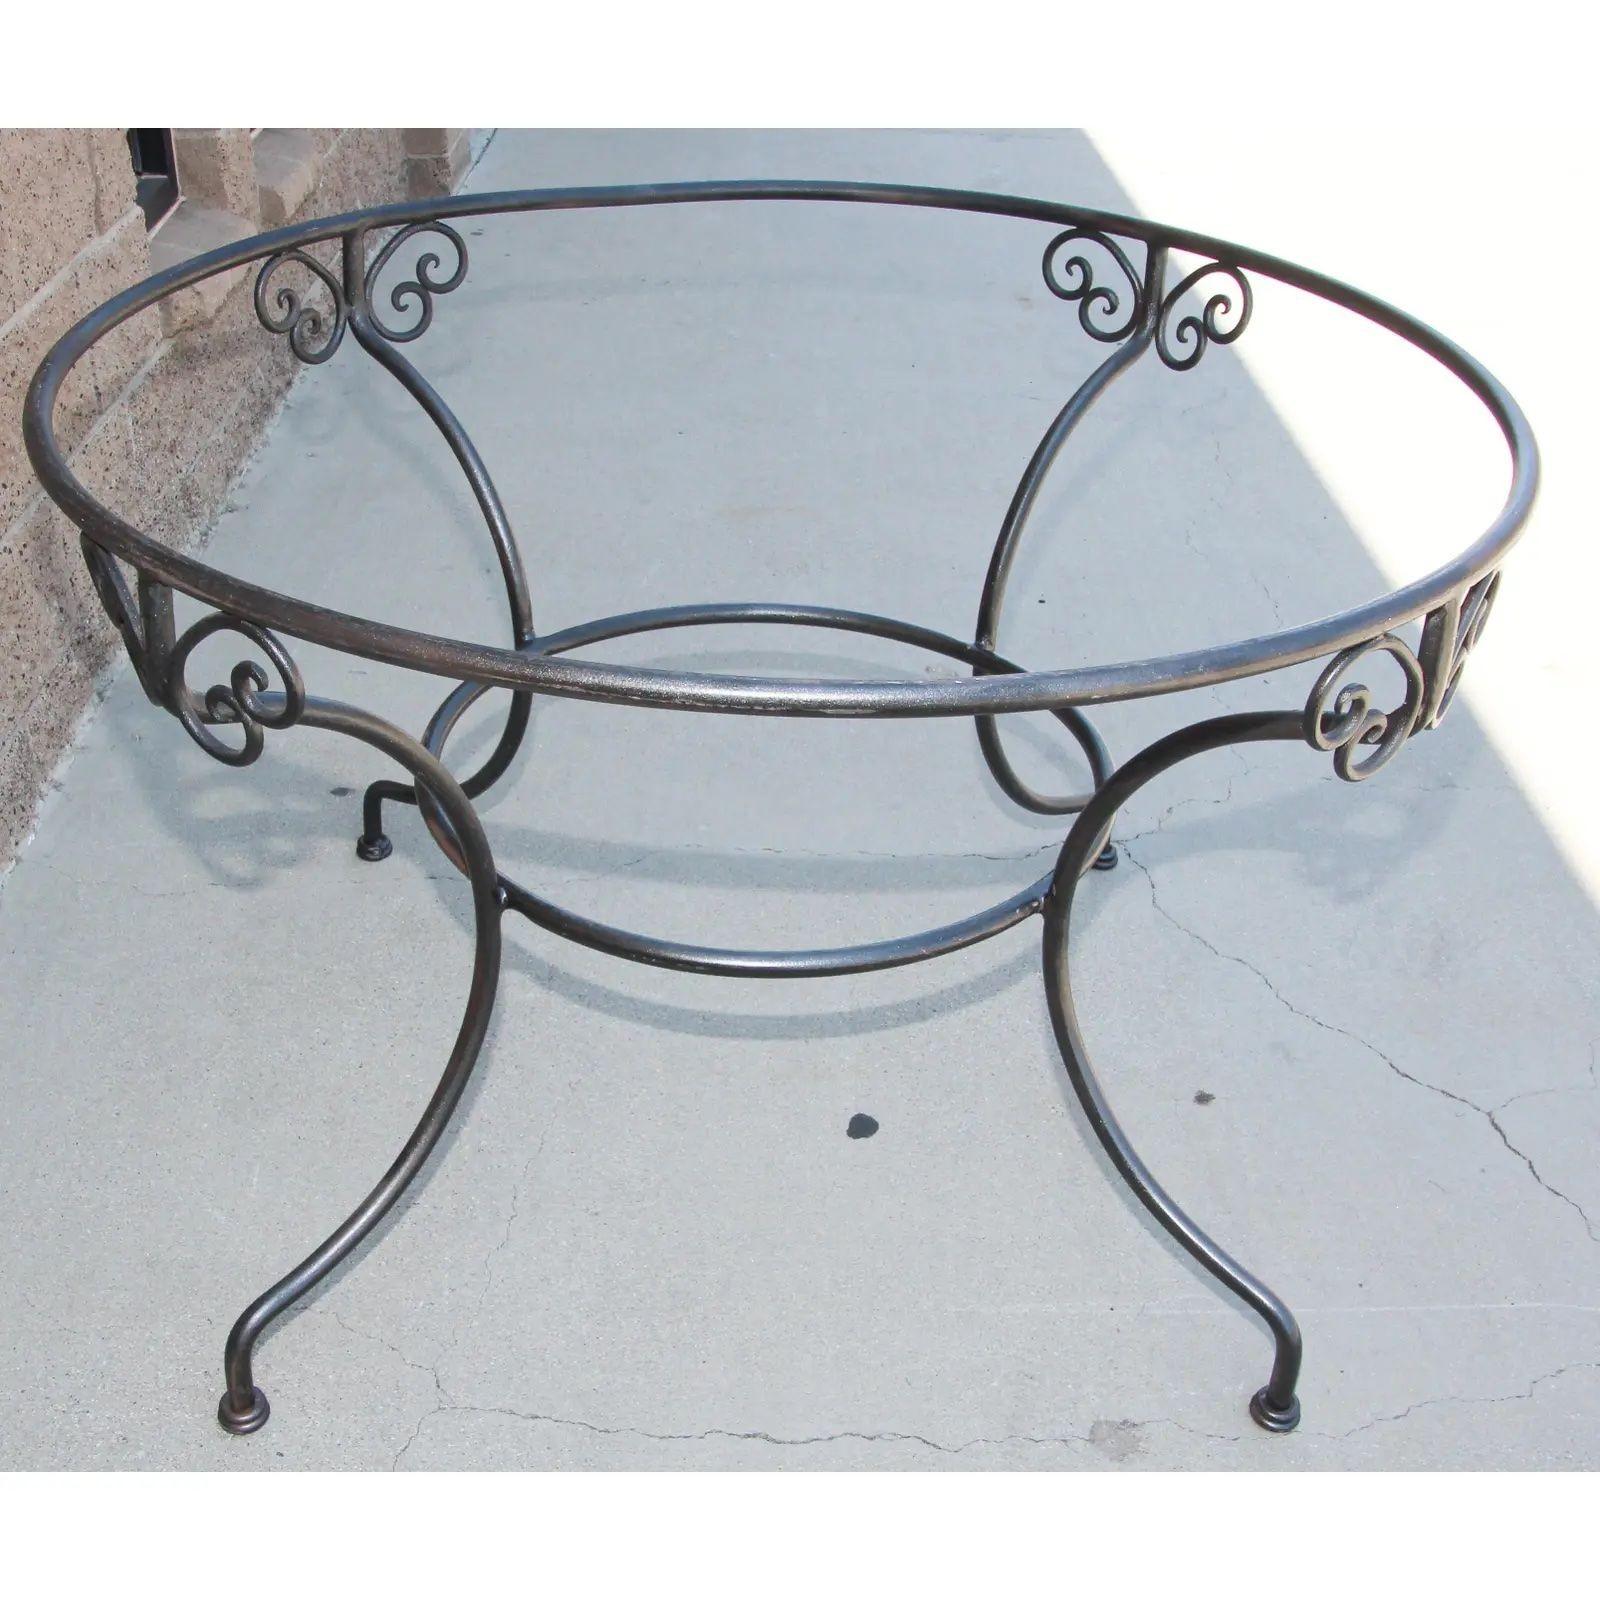 Hand-Crafted Moroccan Outdoor Round Mosaic Tile Dining Table on Iron Base 47 in.